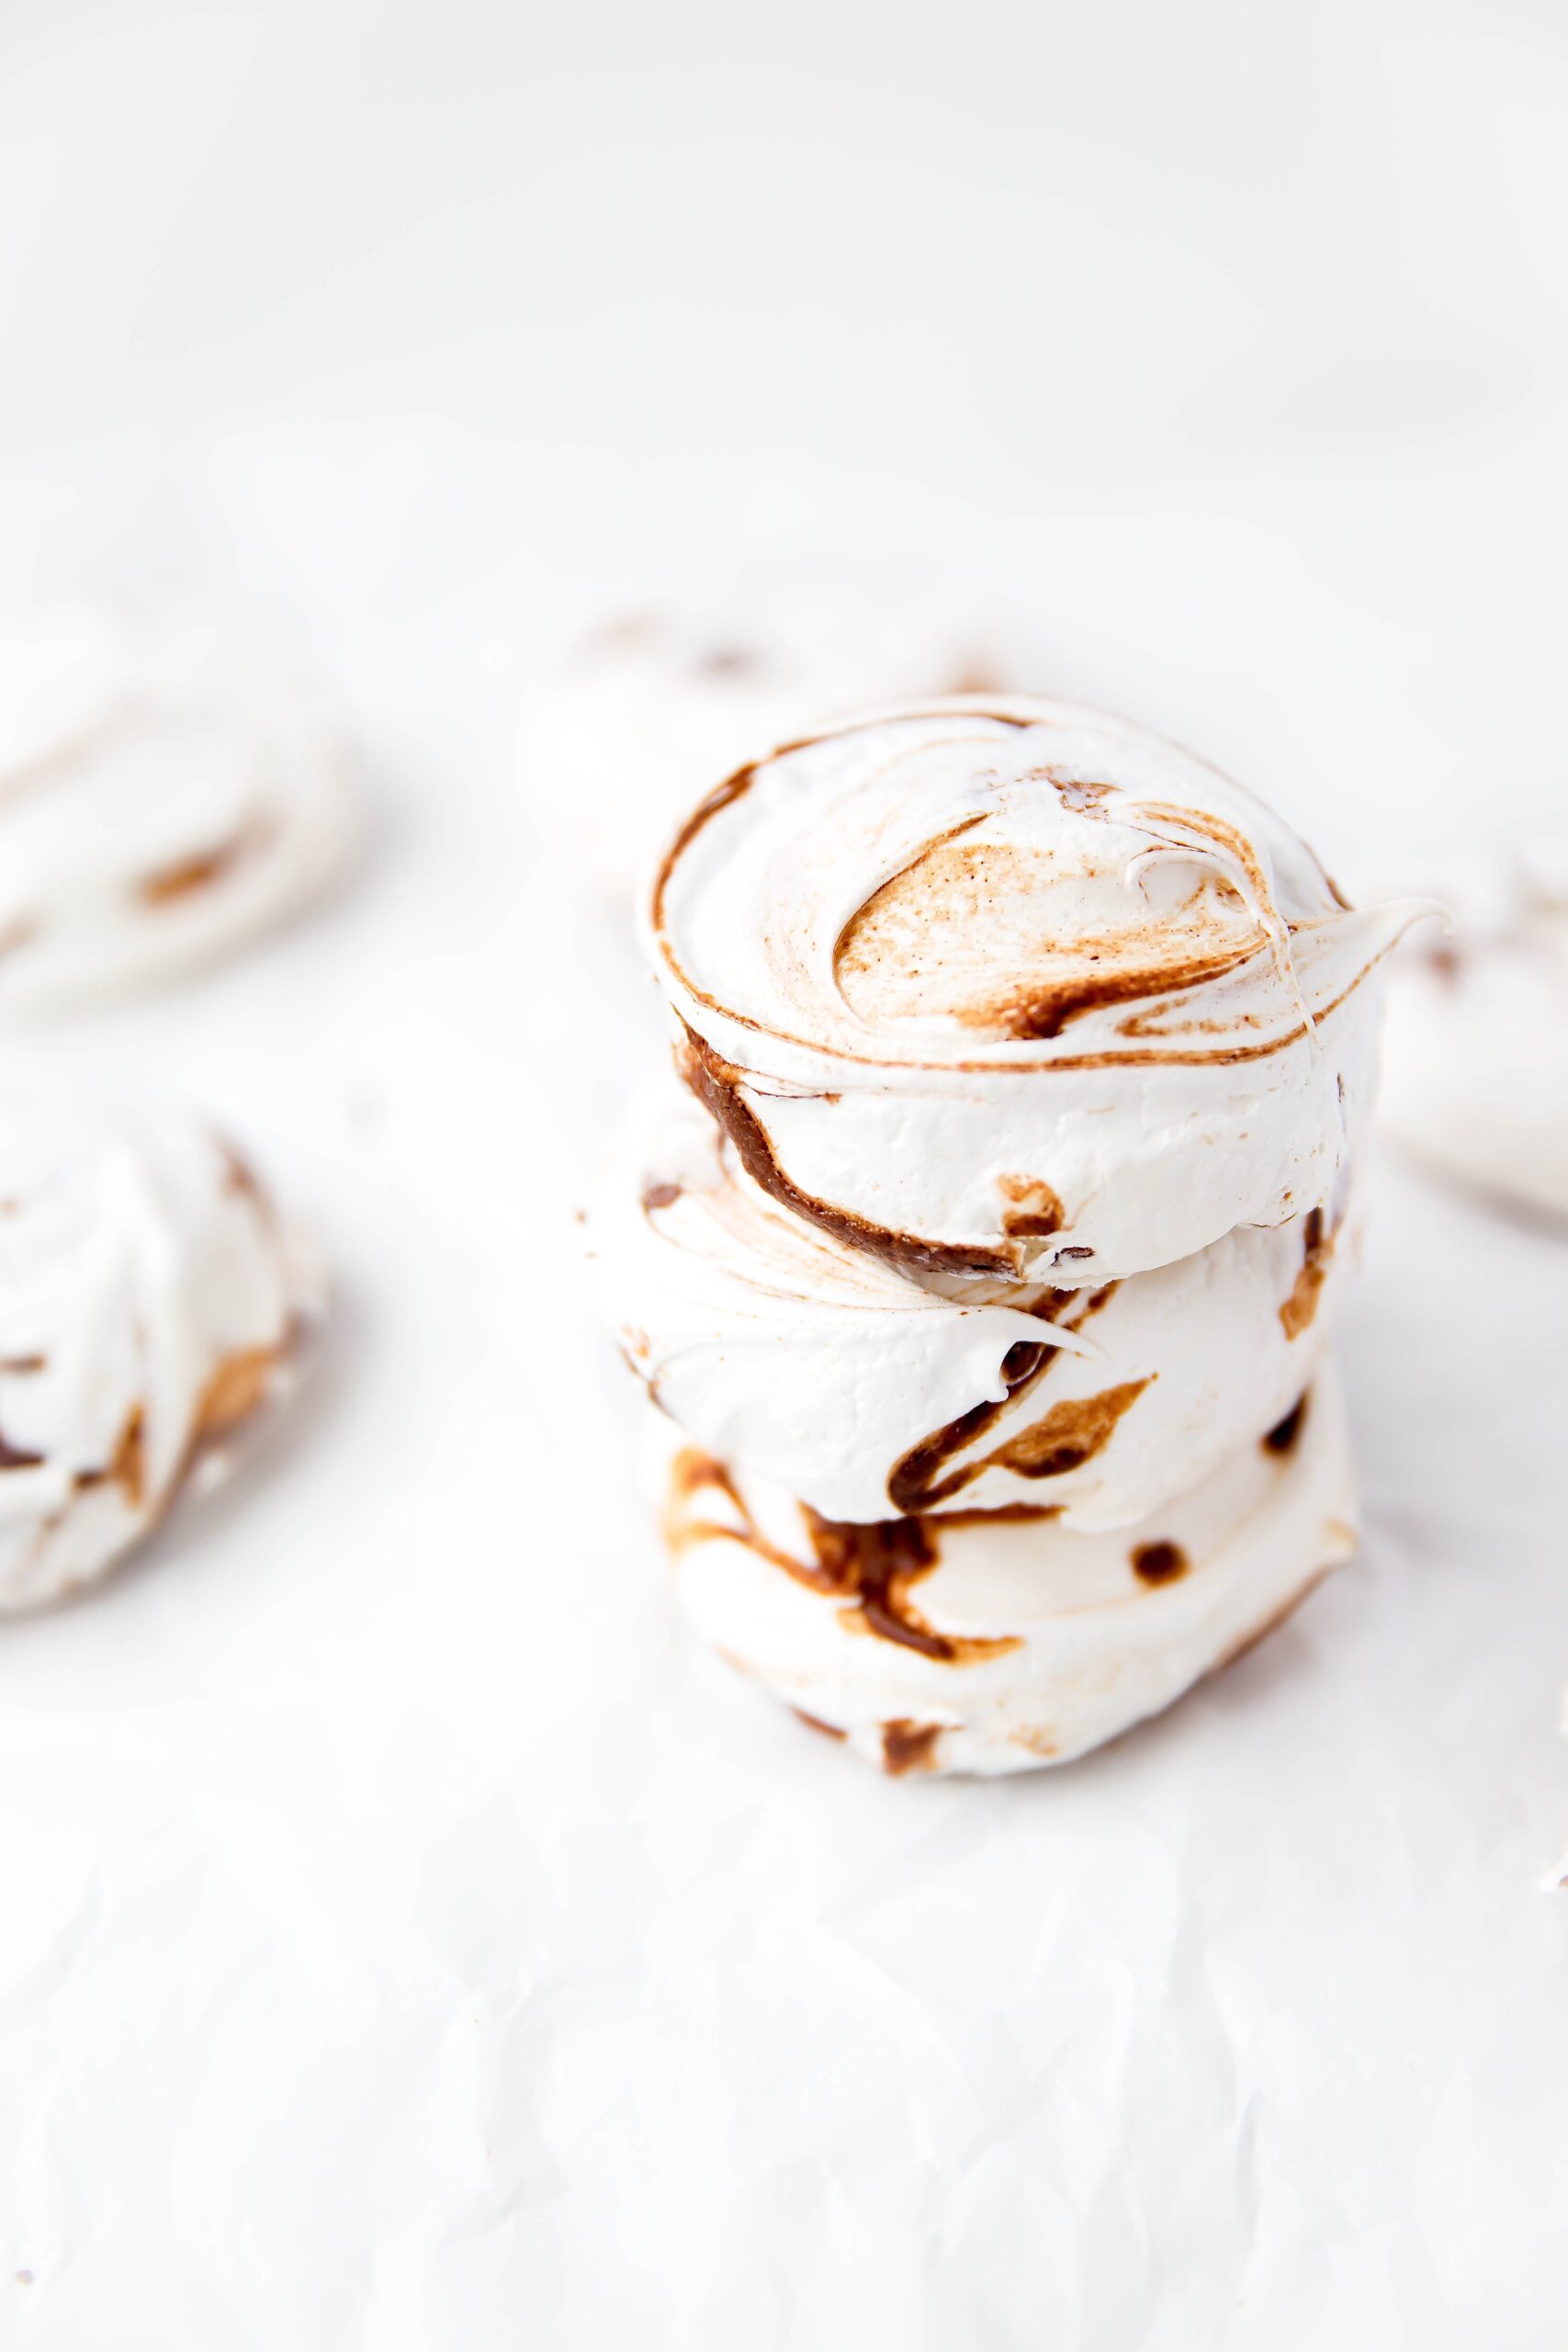 Nutella Meringues: Pillowy meringue cookies swirled with ribbons of rich nutella.